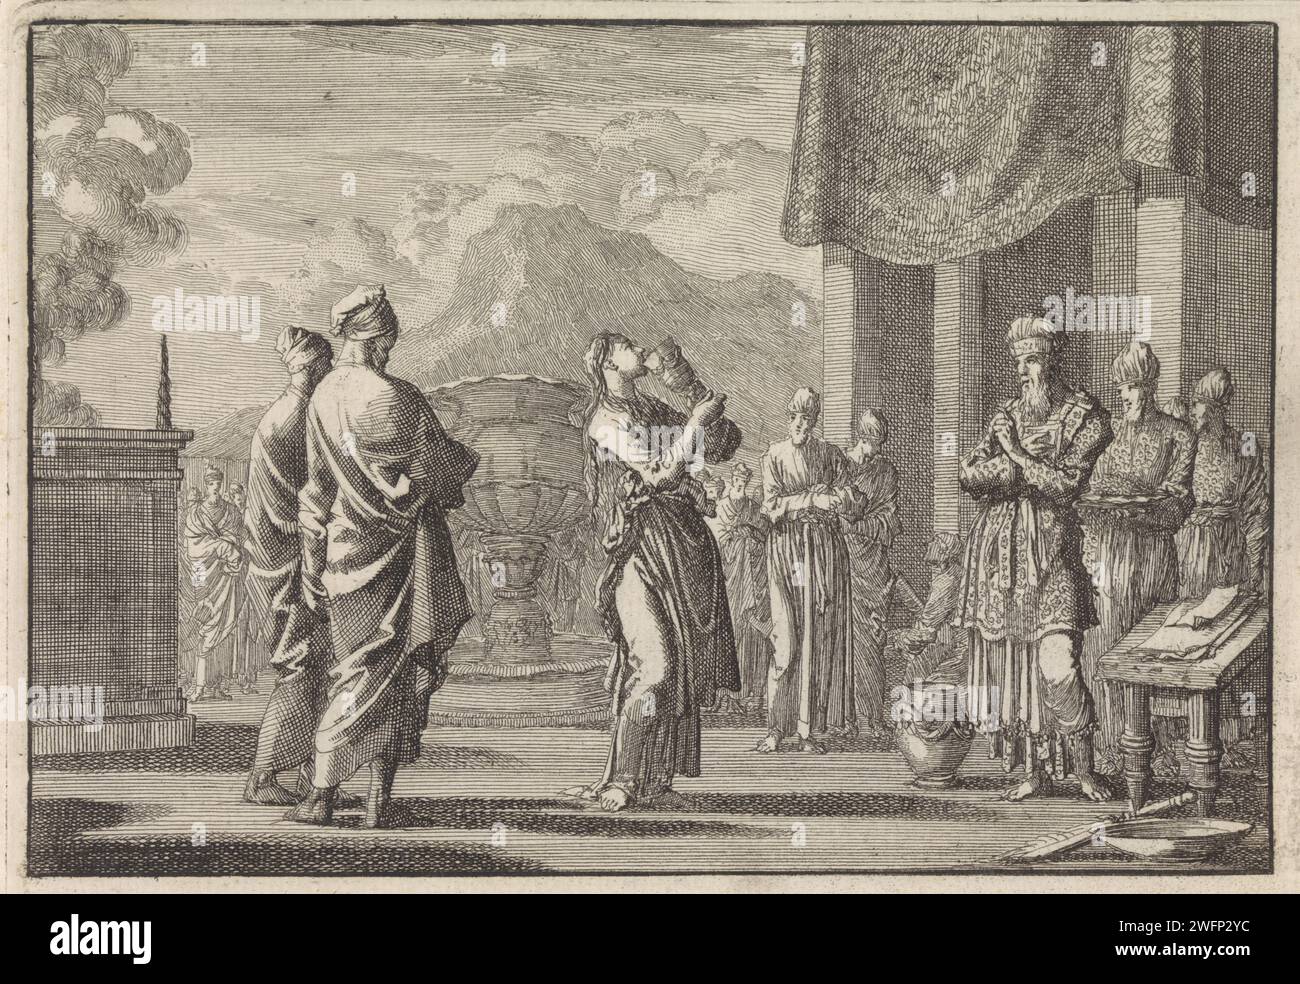 Ceremony that tests female unfaithfulness, Jan Luyken, 1703 print  Print Maker: Haarlem Publisher: Amsterdam paper etching ordealing an adulterous woman (Jewish law) Stock Photo